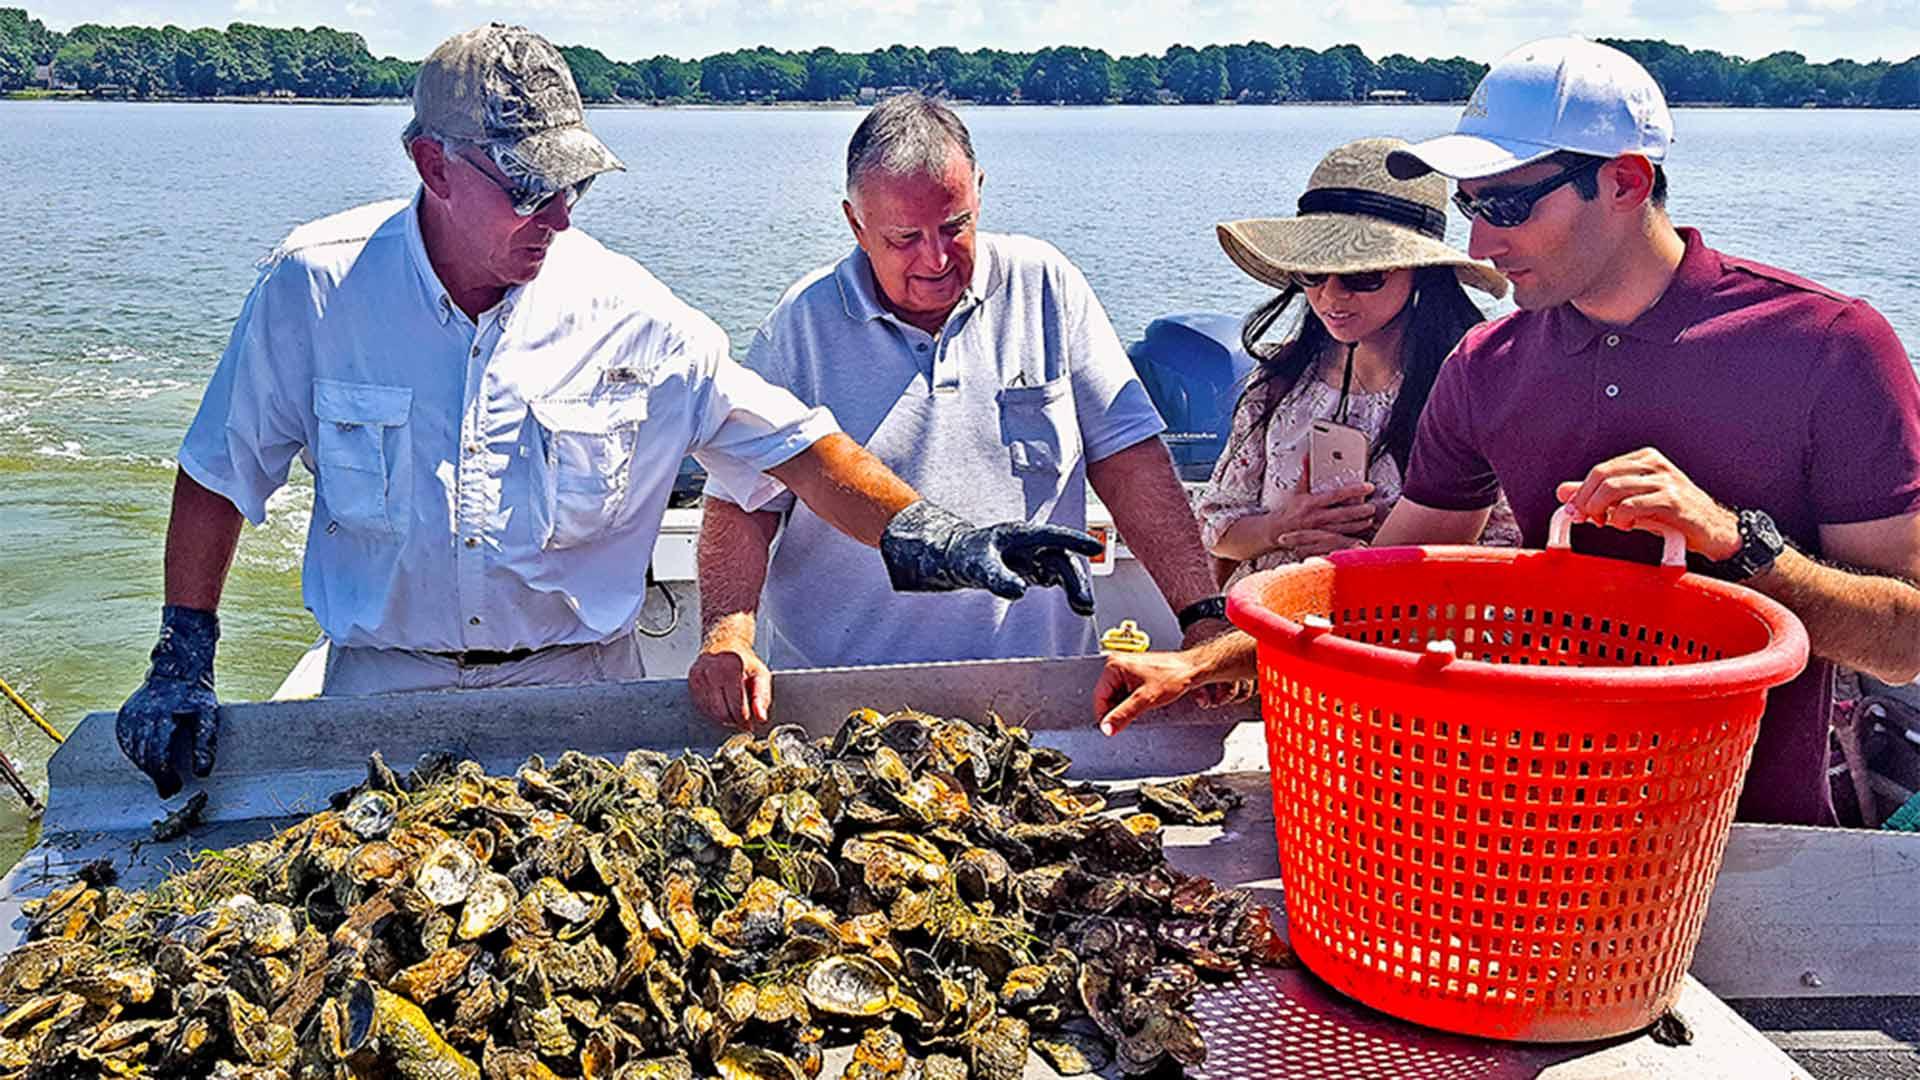 UMD researchers examining shellfish in the field